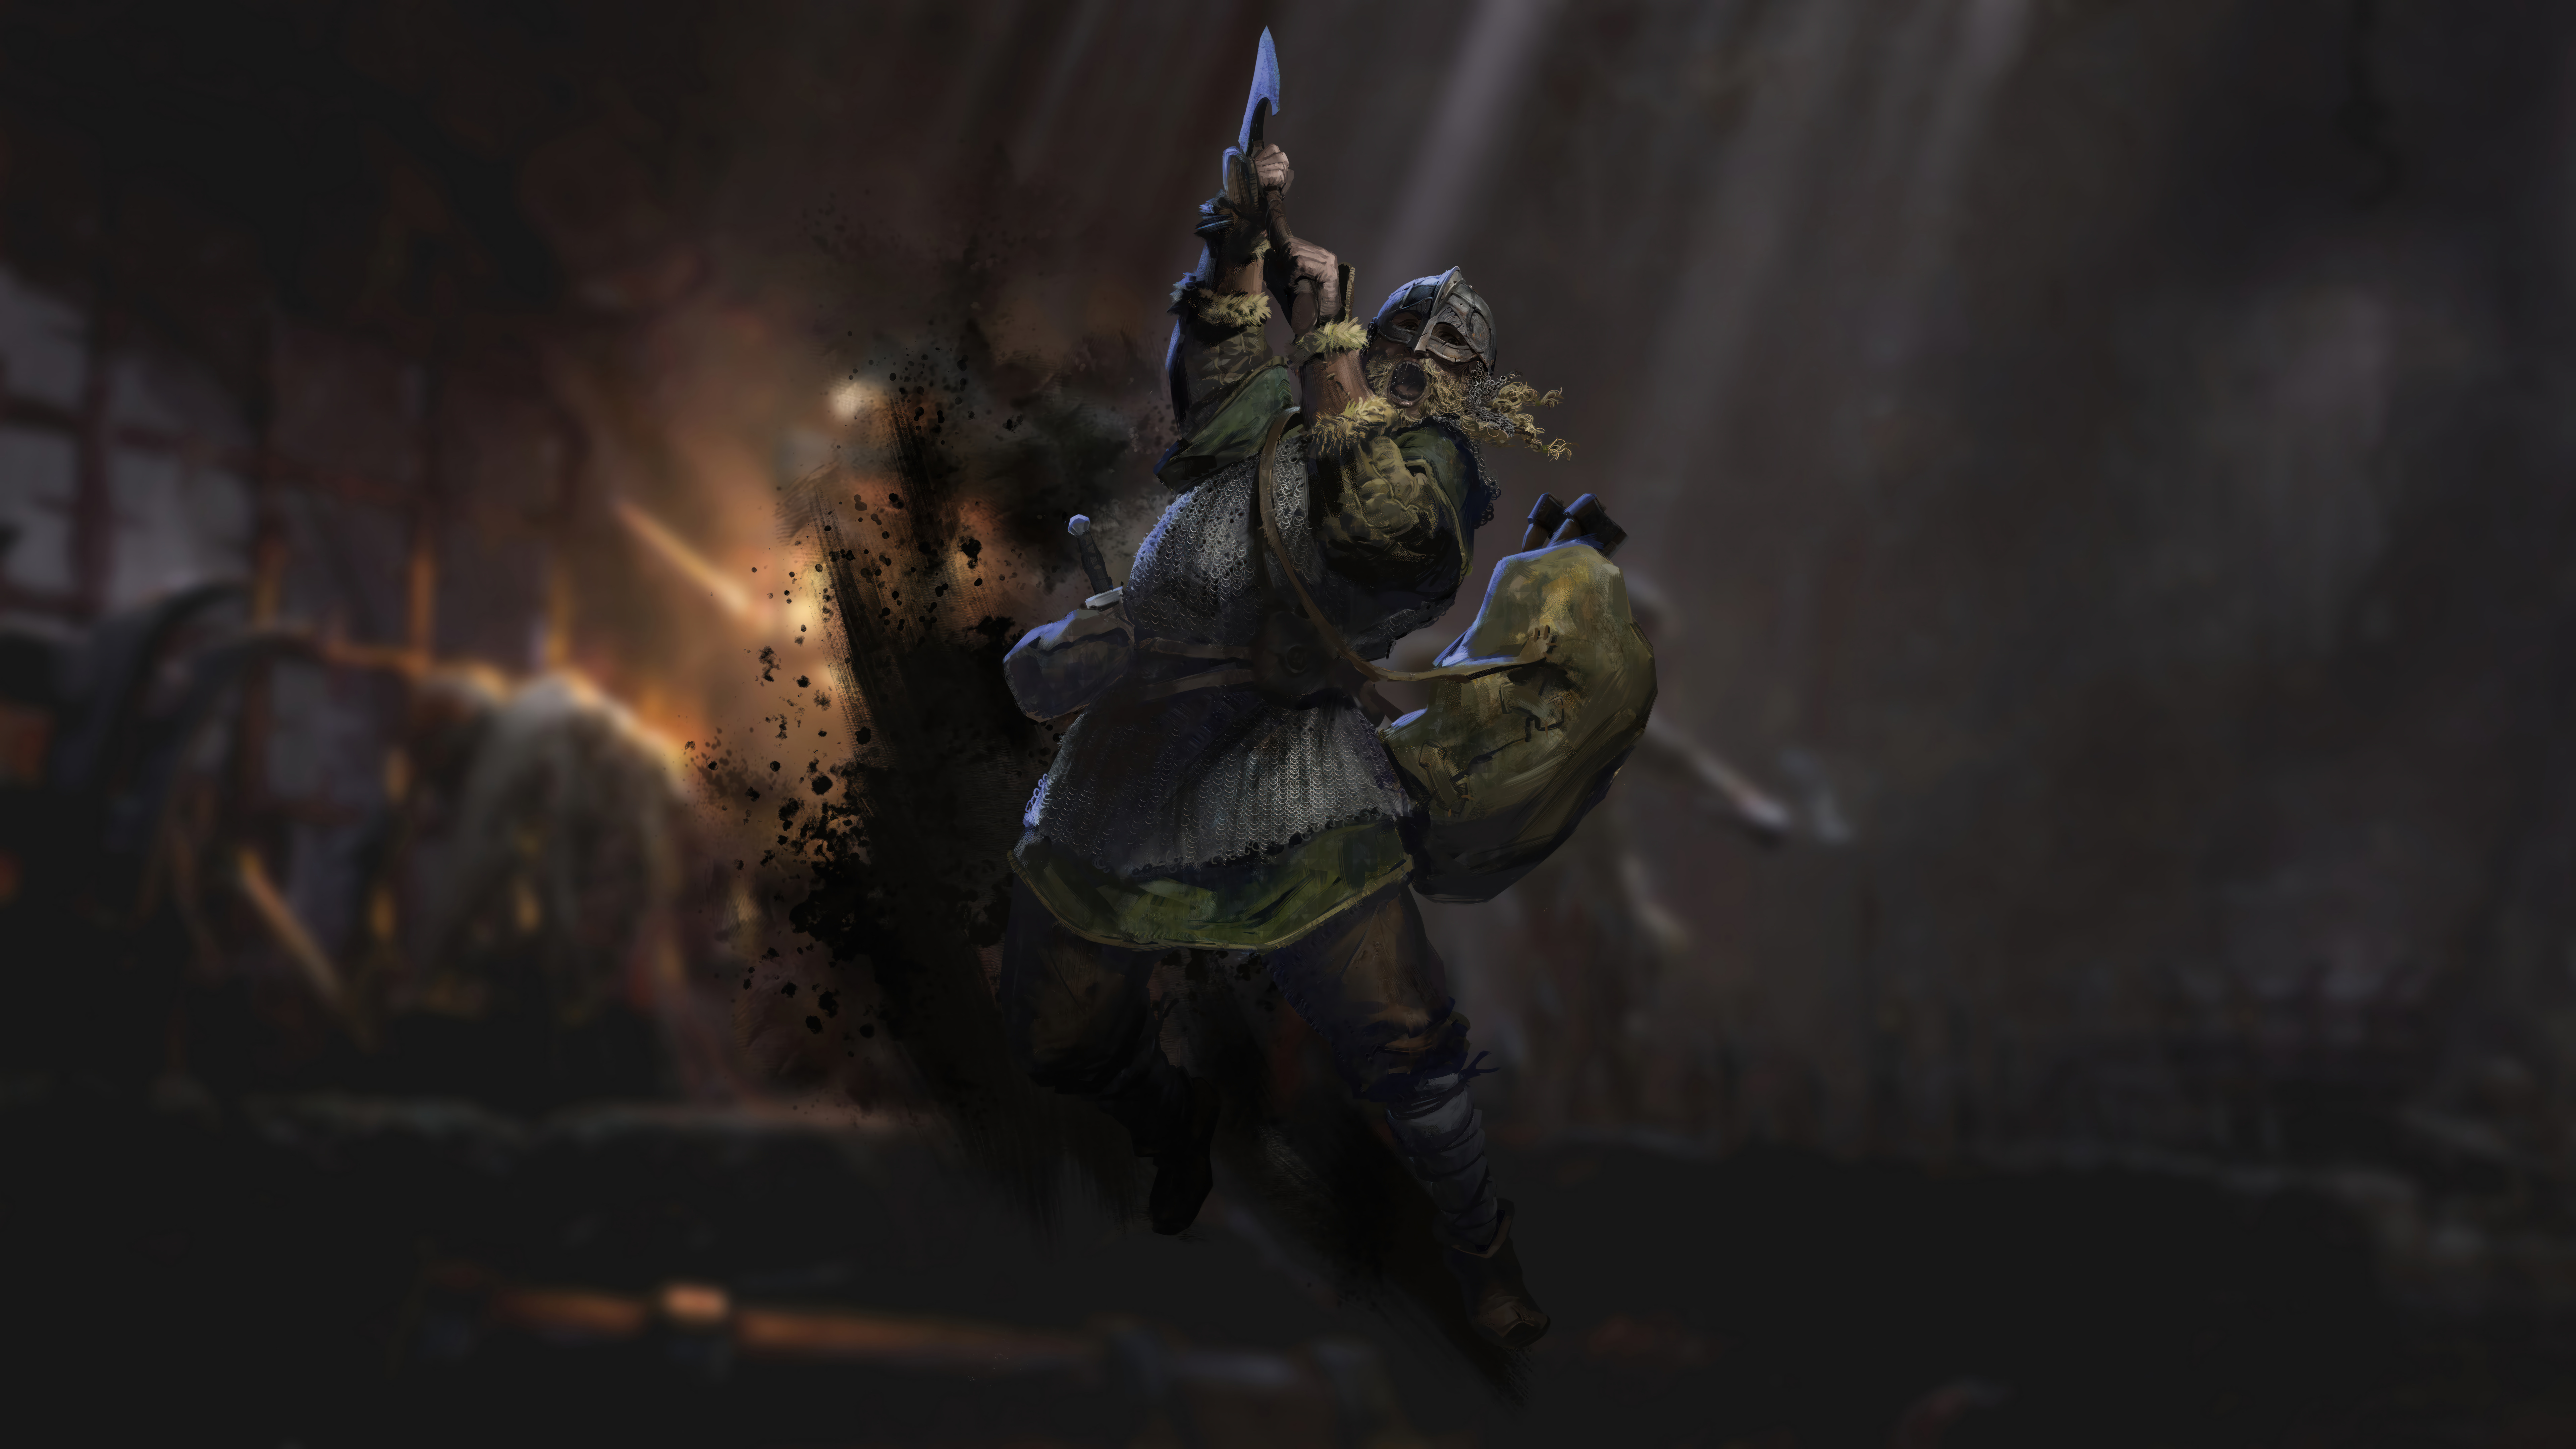 HD desktop wallpaper featuring a barbarian warrior from Dark and Darker game, illustrated in dynamic combat stance with a dark atmospheric background.